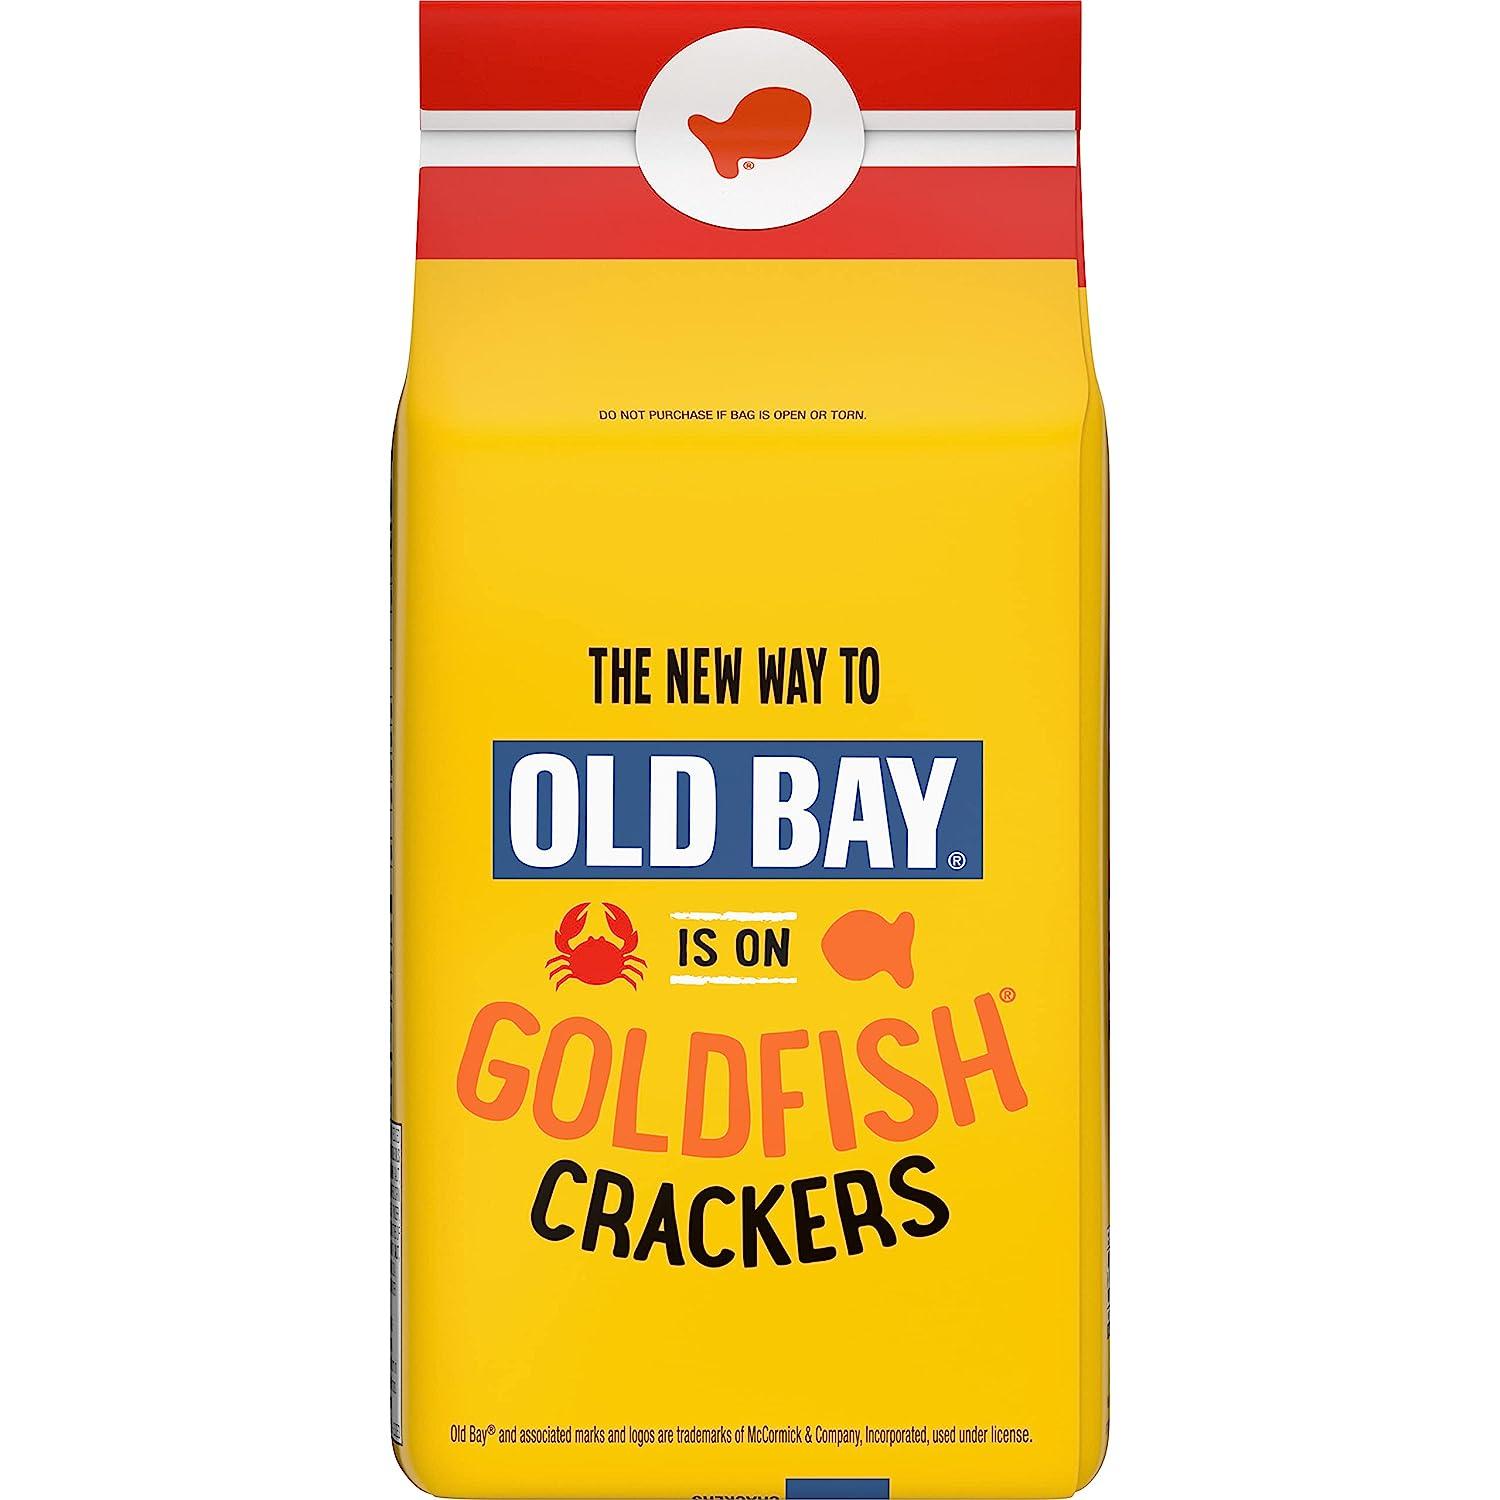 Old Bay Seasoned Goldfish Return for a Limited Time